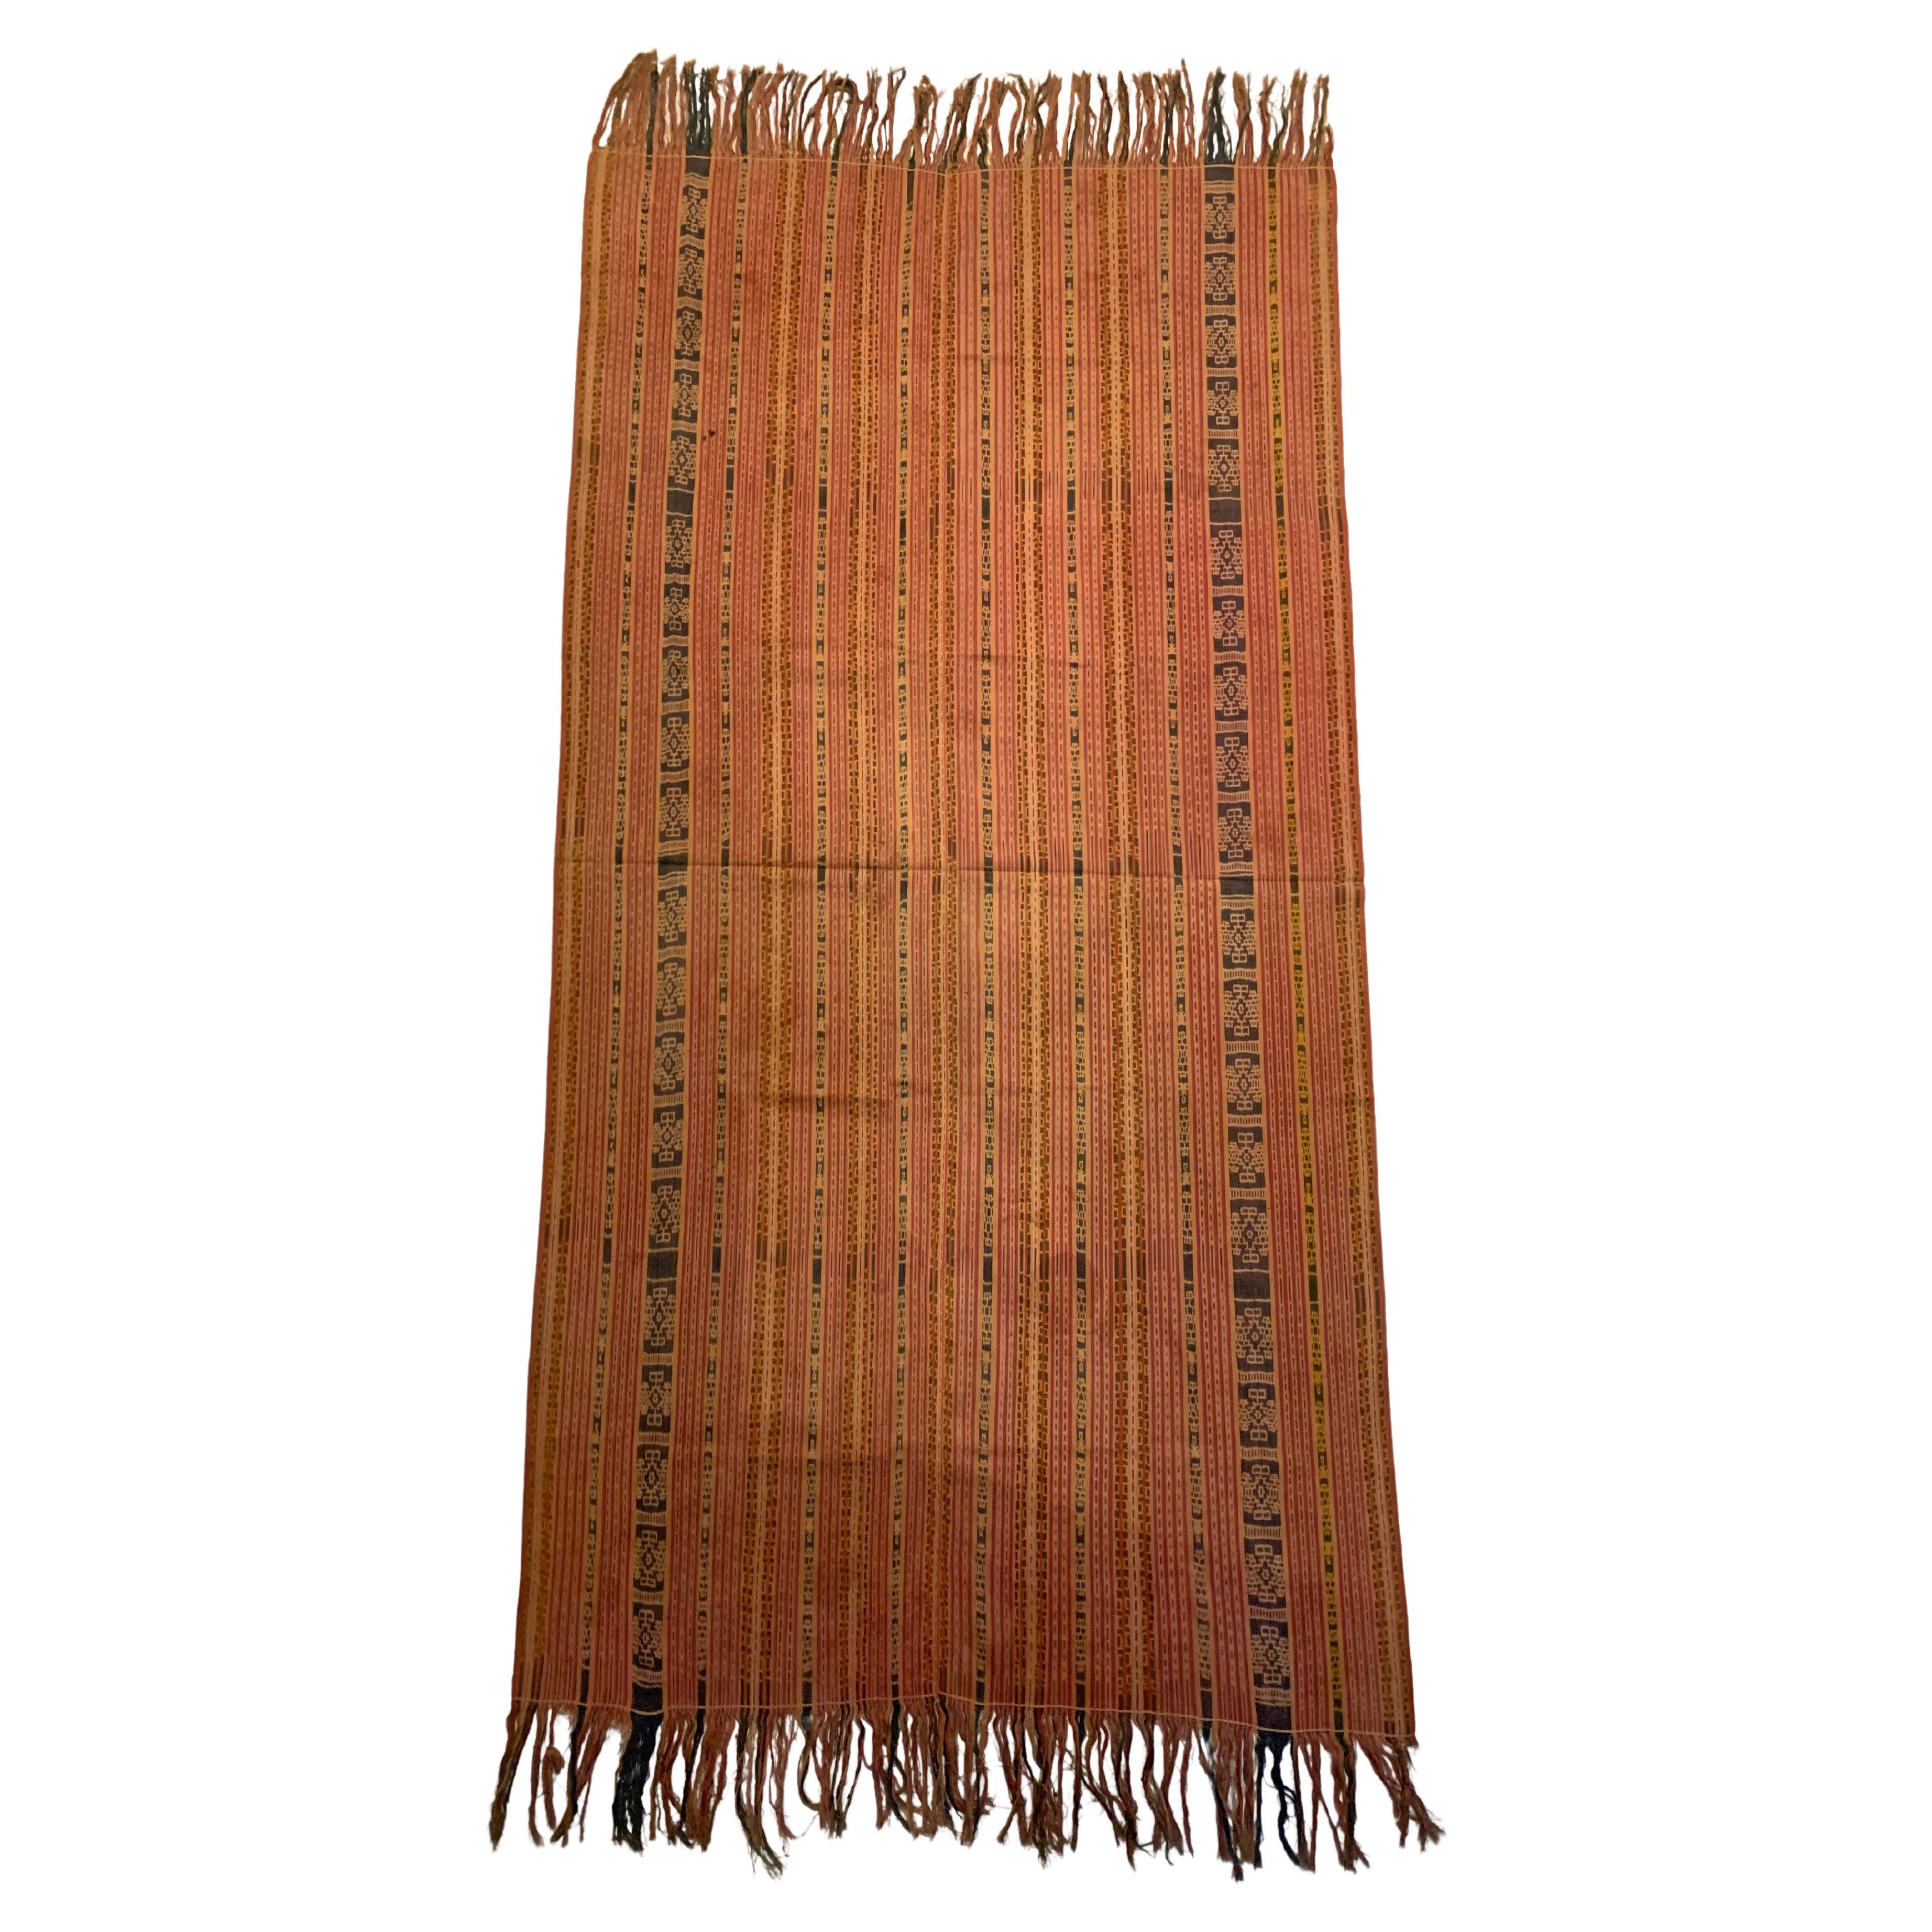 Rare Ikat Textile from Timor Stunning Tribal Motifs & Colors, Indonesia c. 1900